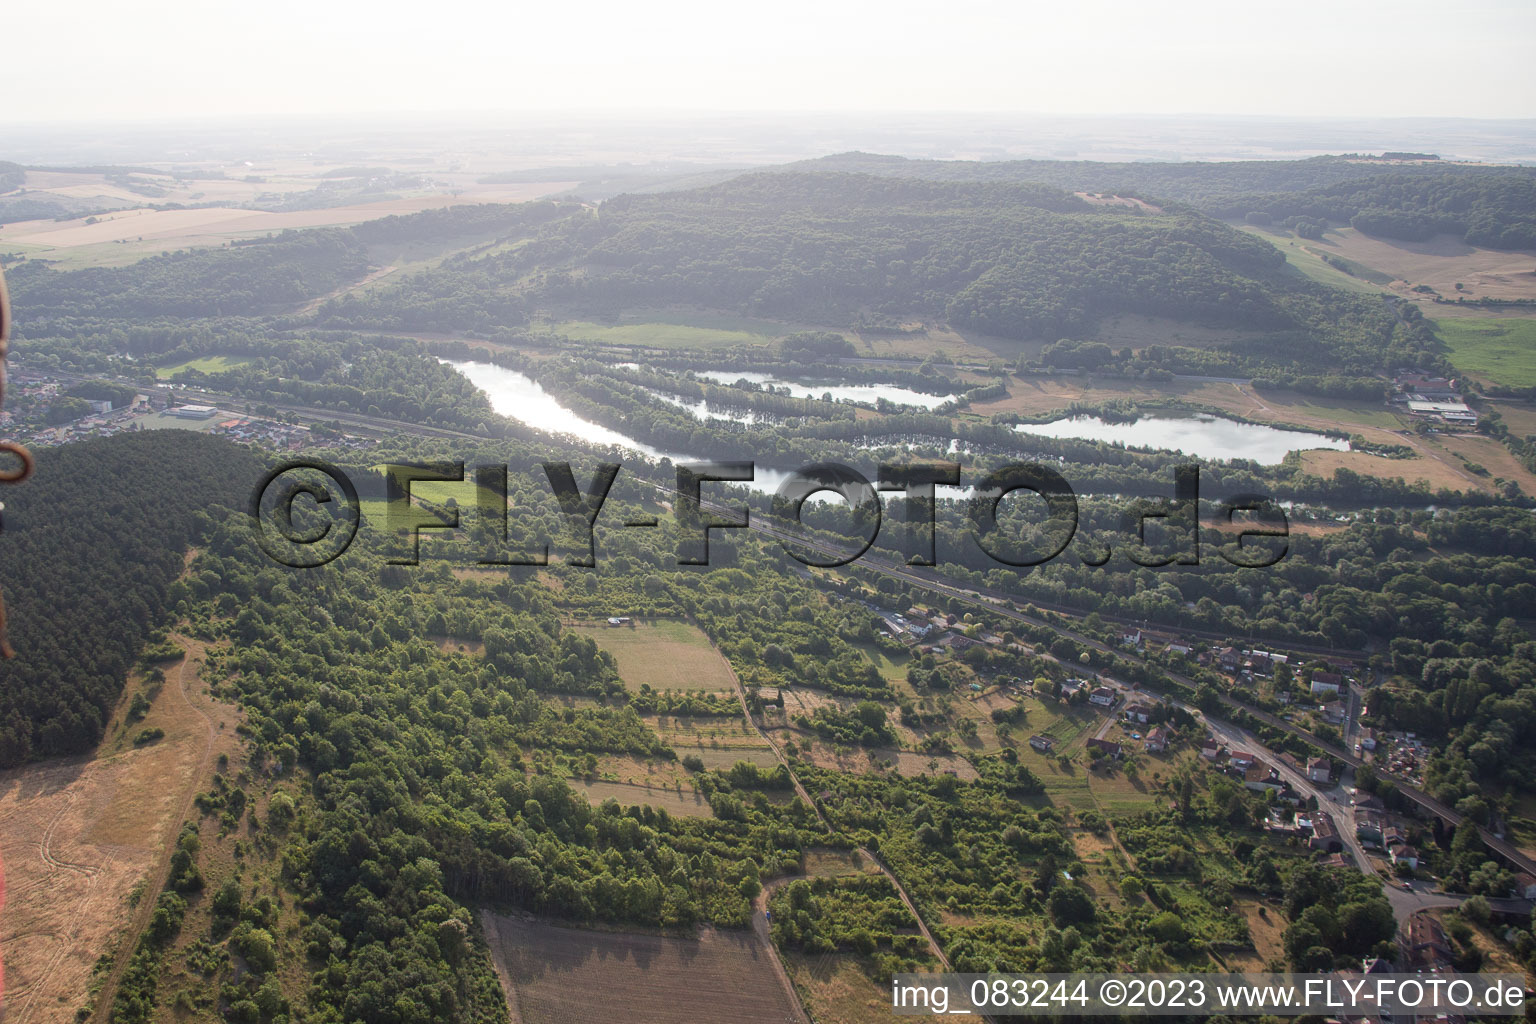 Aerial photograpy of Arnaville in the state Meurthe et Moselle, France